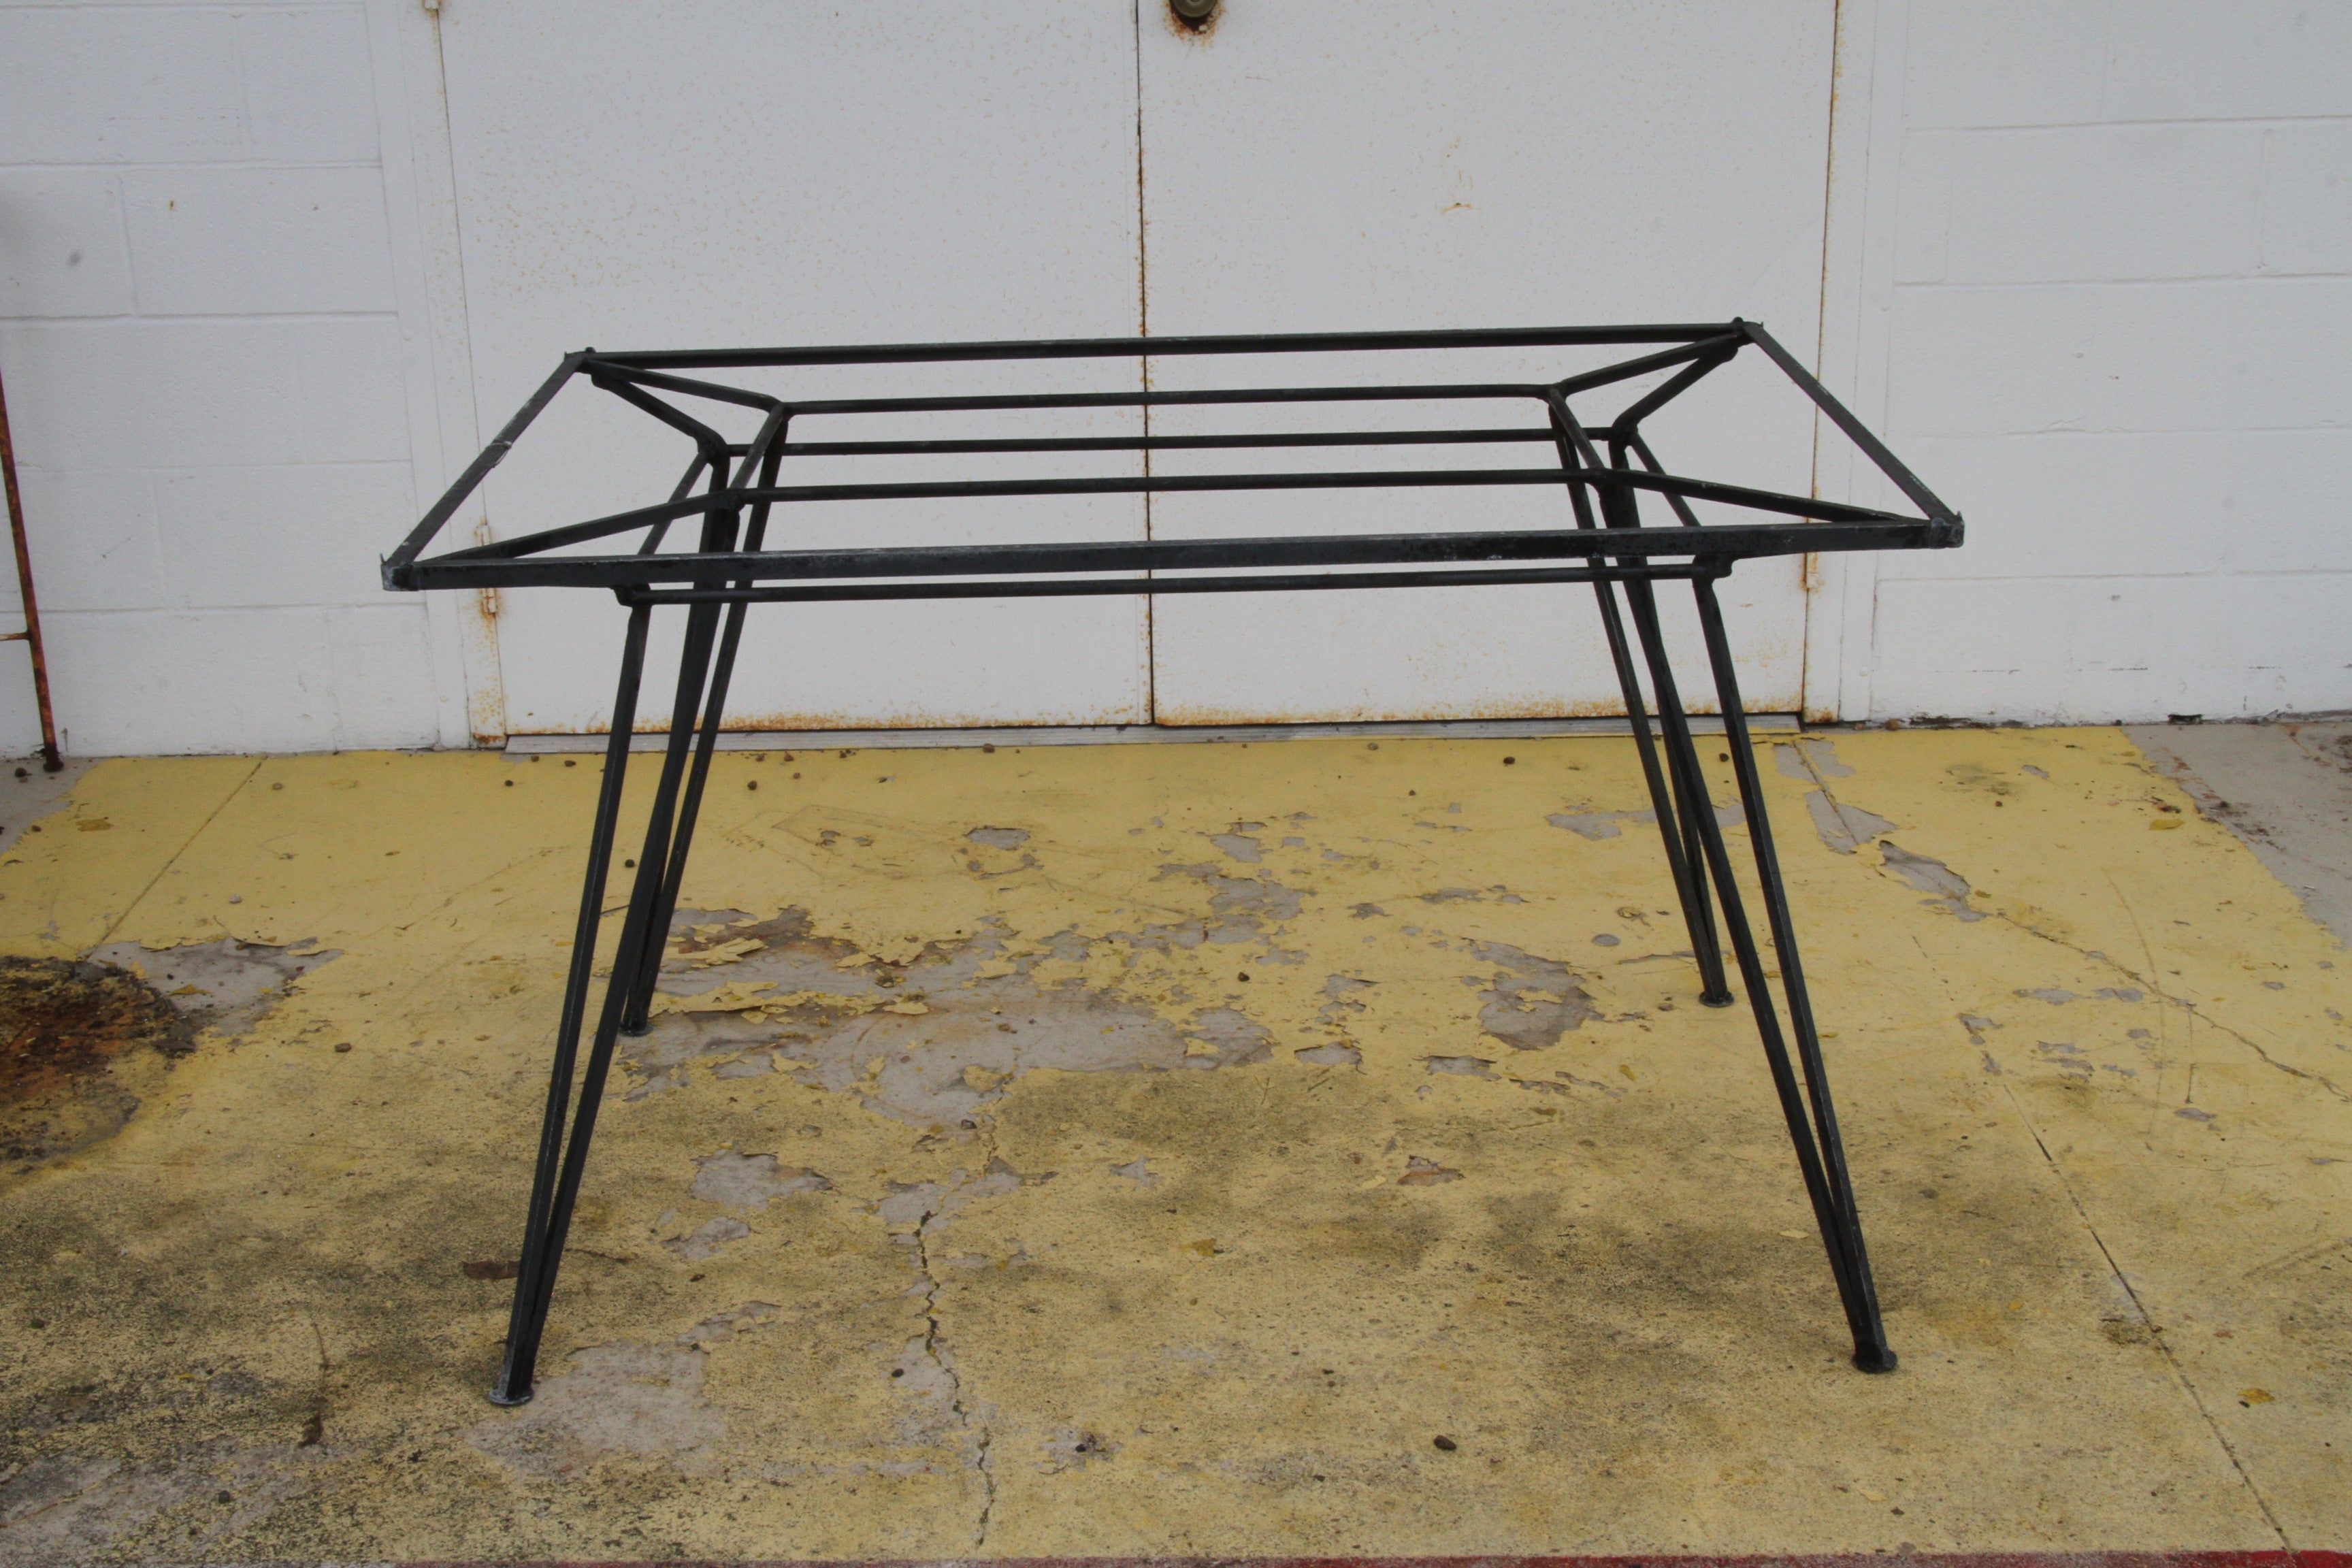 Salterini Style midcentury Wrought Iron Table

Rare wrought iron table attributed to Salterini. Structurally sound and sturdy. Could be used indoor or outdoor.
The table is being offered without the glass insert top.

48